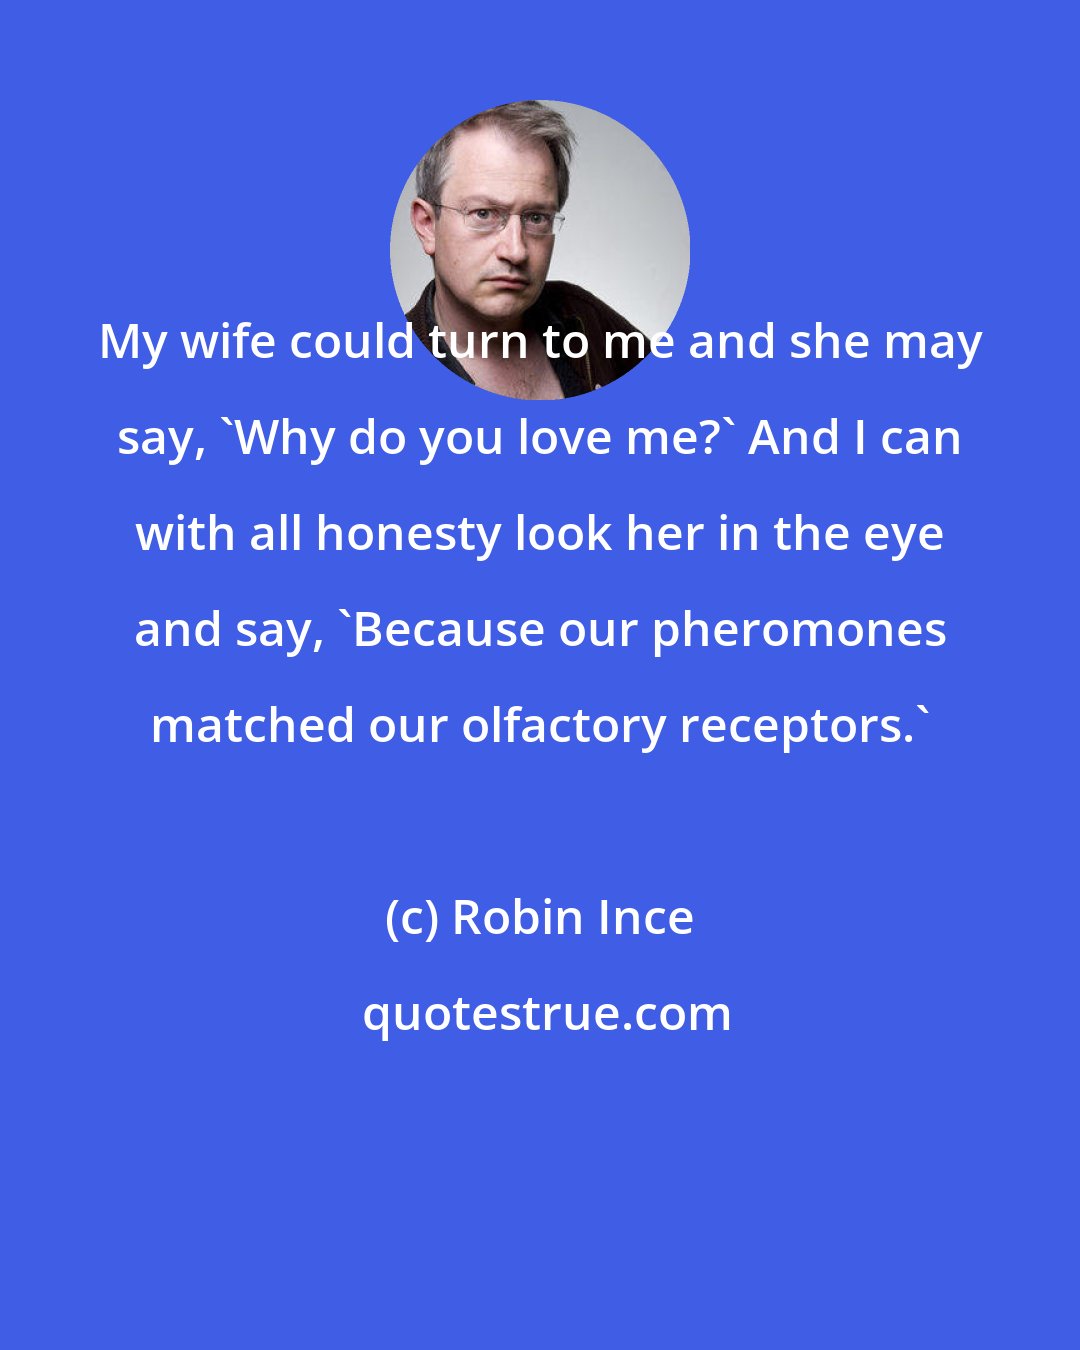 Robin Ince: My wife could turn to me and she may say, 'Why do you love me?' And I can with all honesty look her in the eye and say, 'Because our pheromones matched our olfactory receptors.'